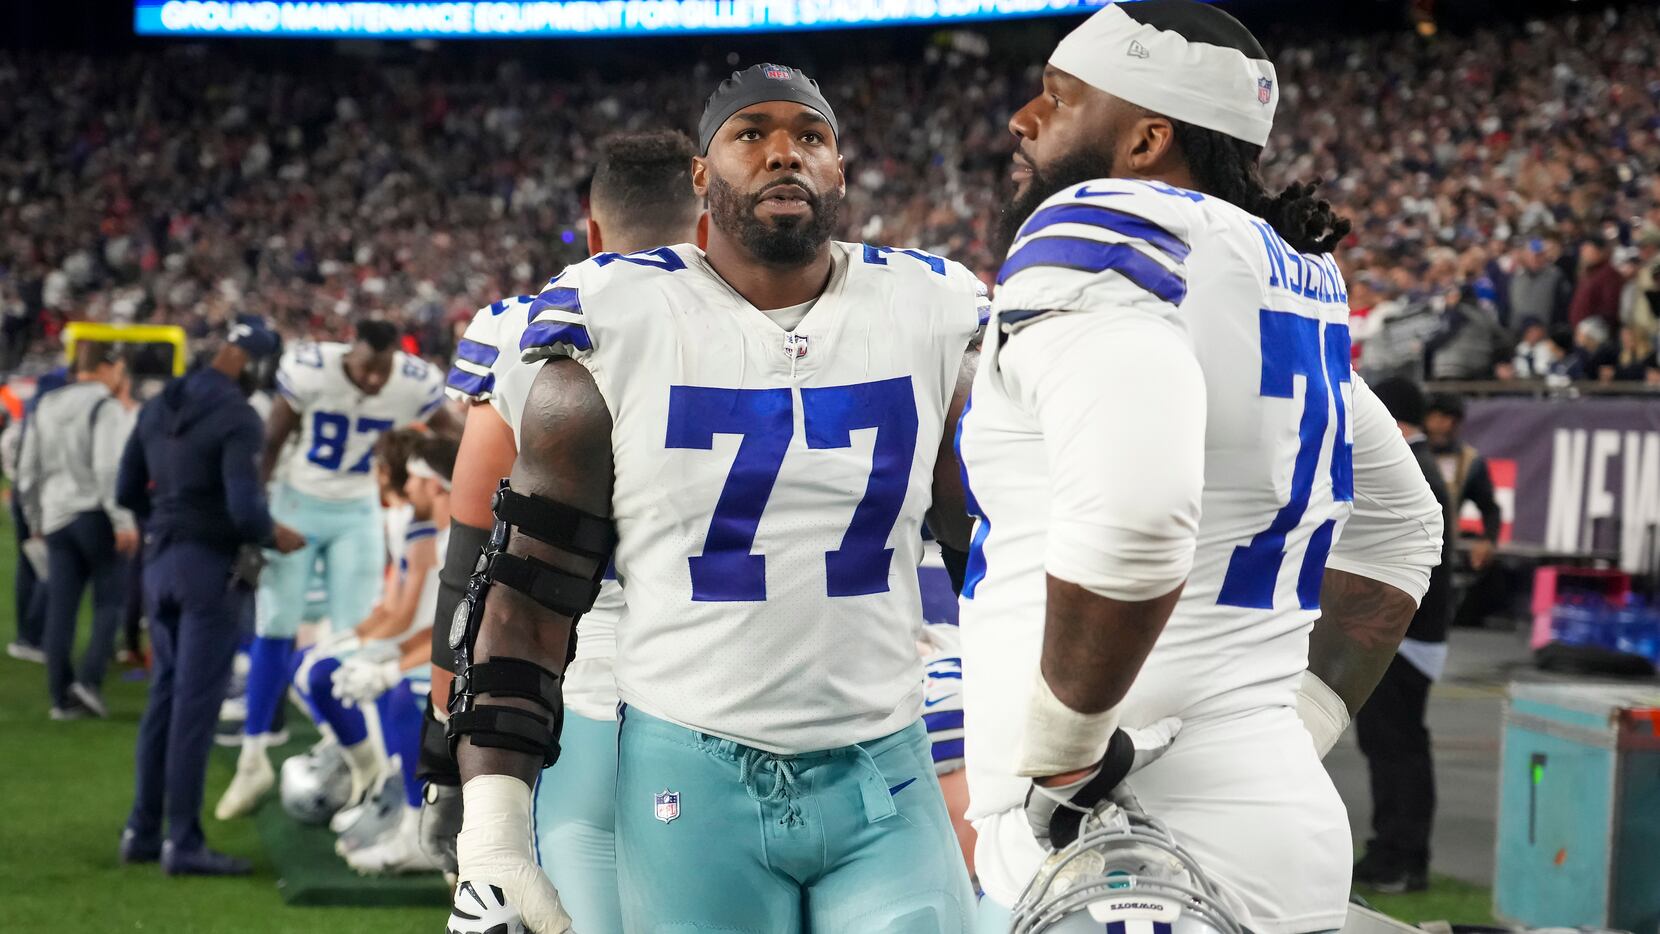 Cowboys LT Tyron Smith officially ruled out for Sunday's game vs. Broncos